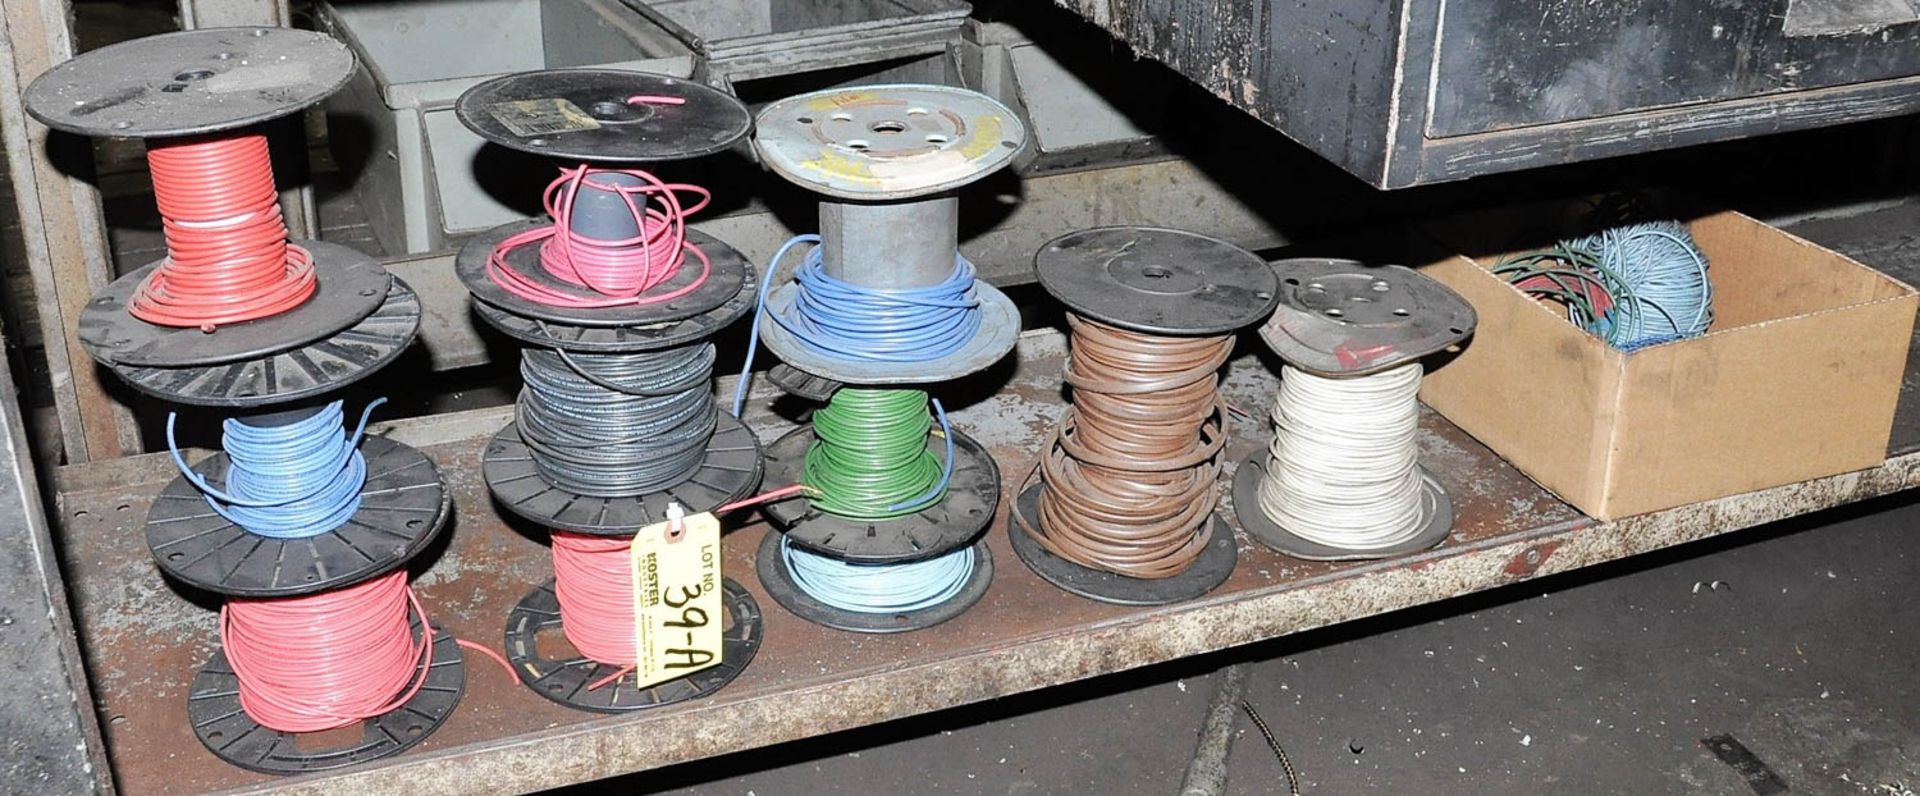 Lot of Assorted Partial Spools of Wire Under Bench